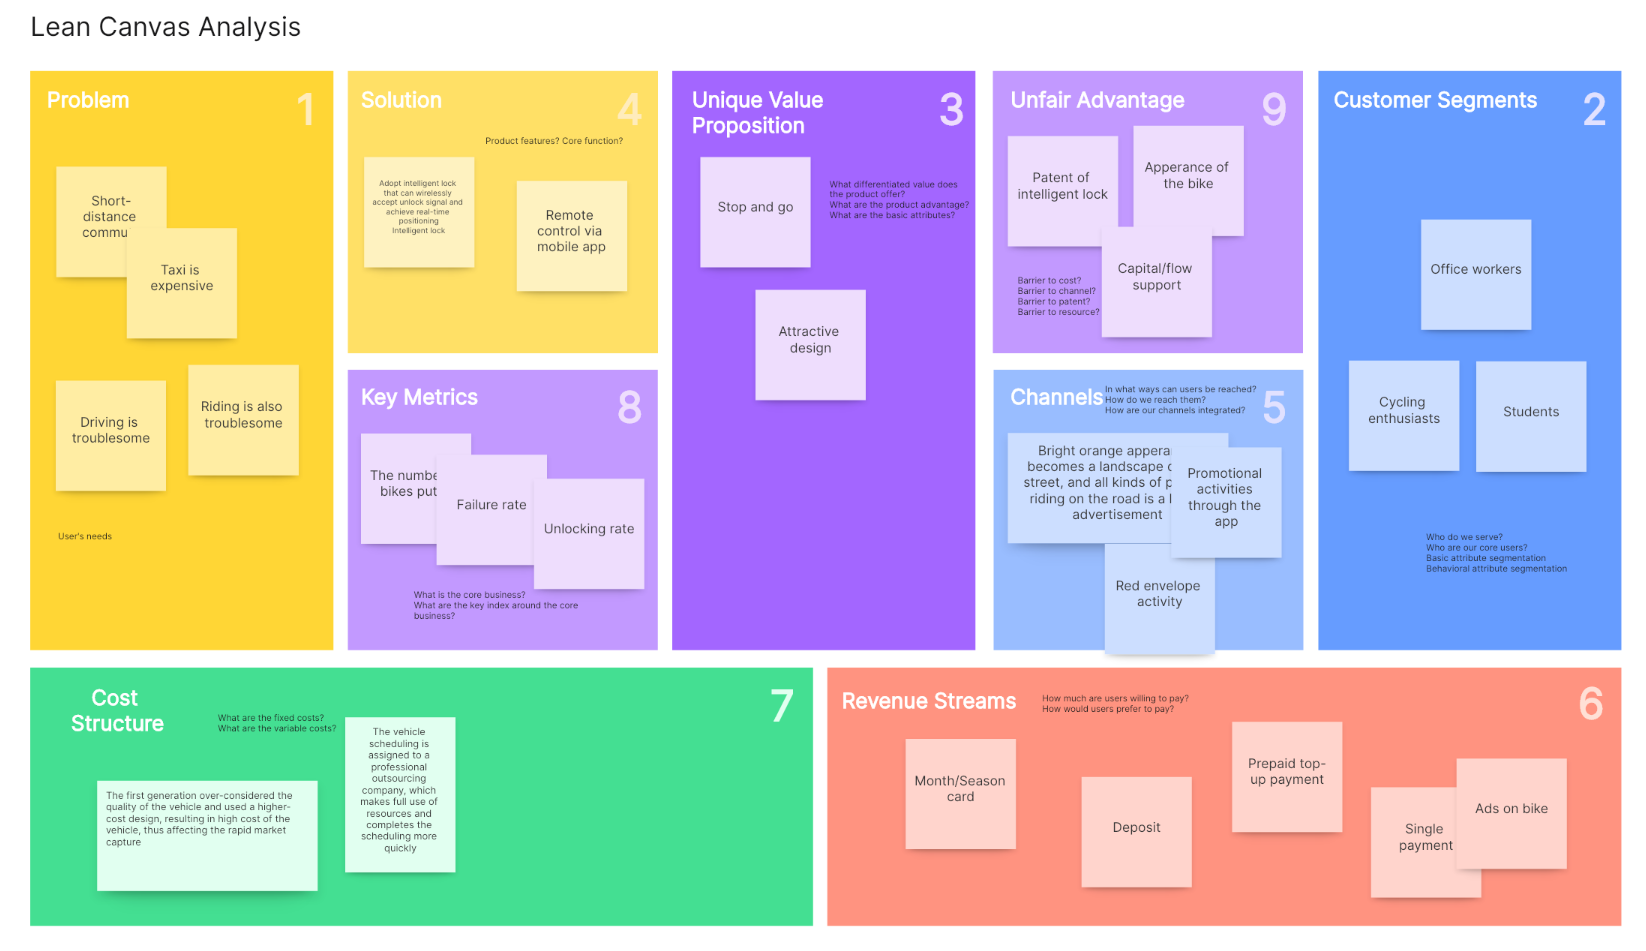 Unraveling the Lean Canvas: A Comprehensive Guide